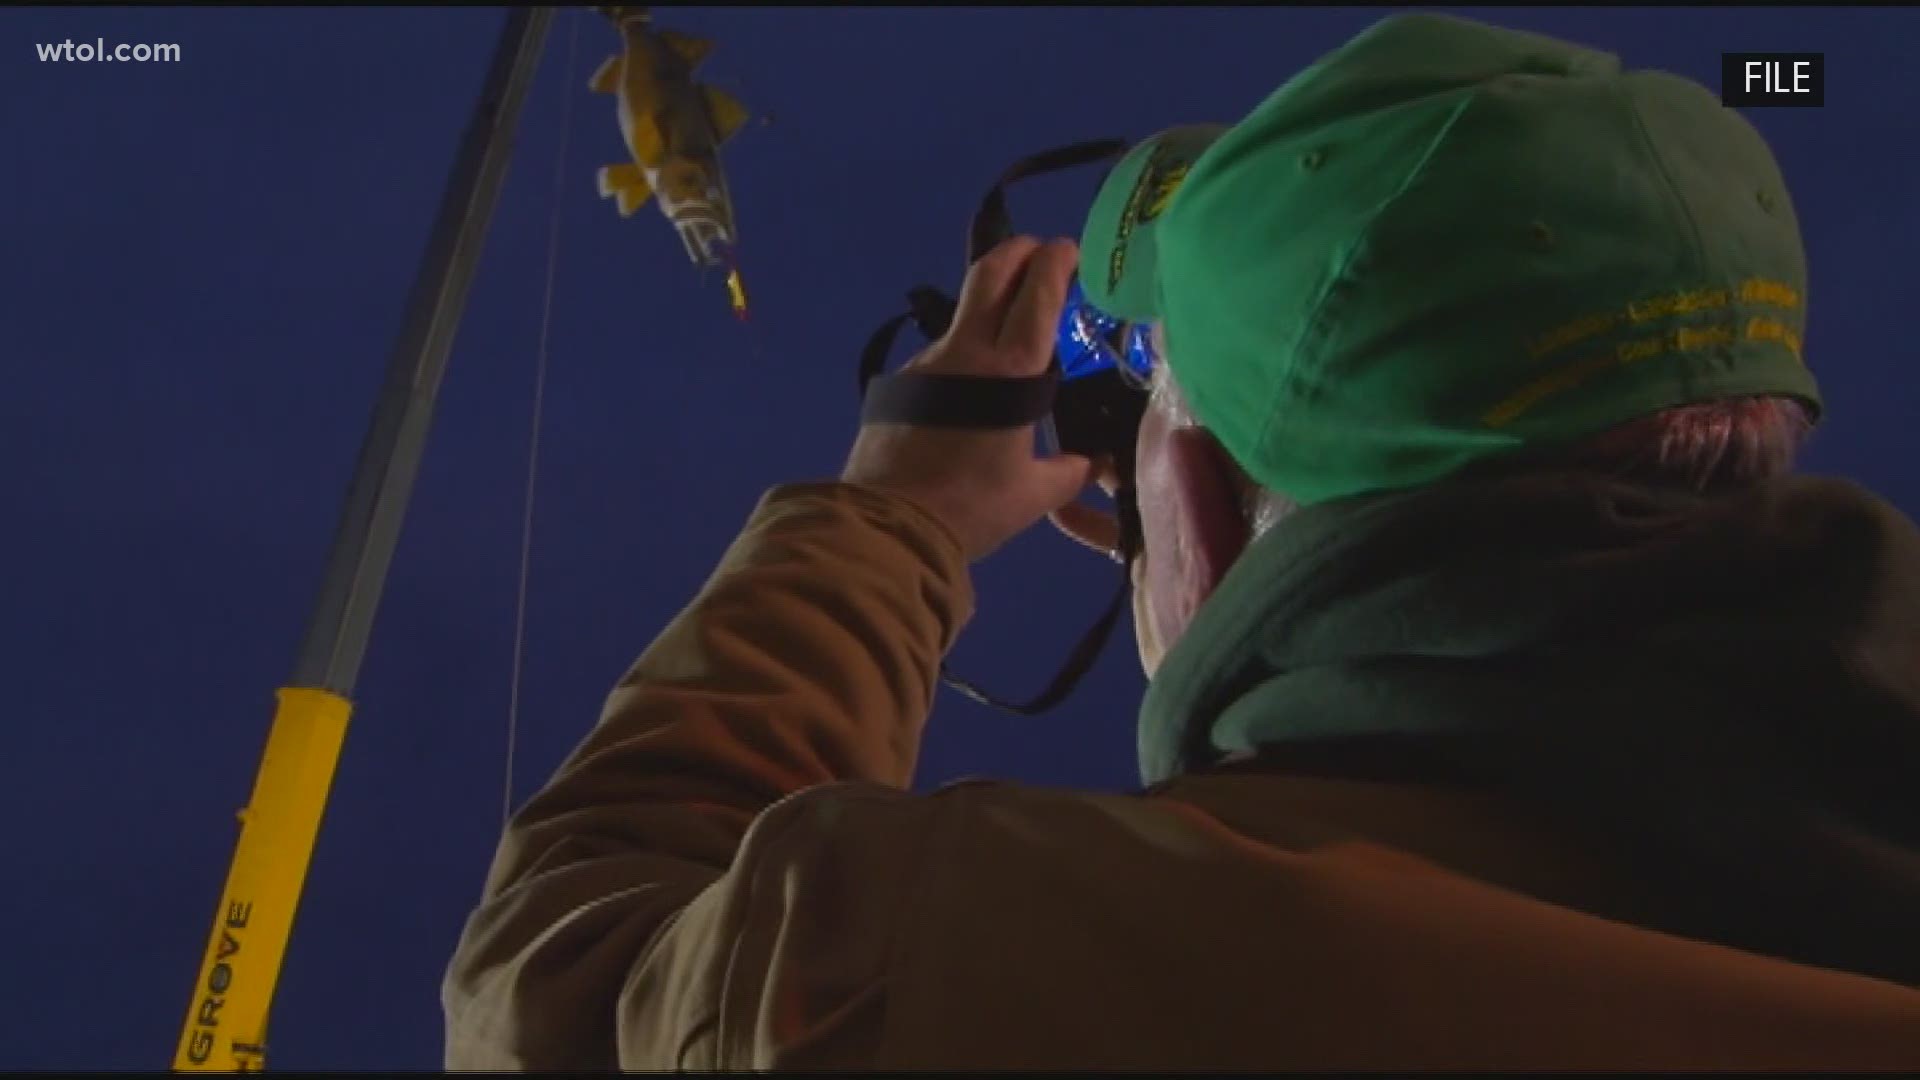 Watch the Walleye Drop from home, as the annual tradition goes online for the very first time.